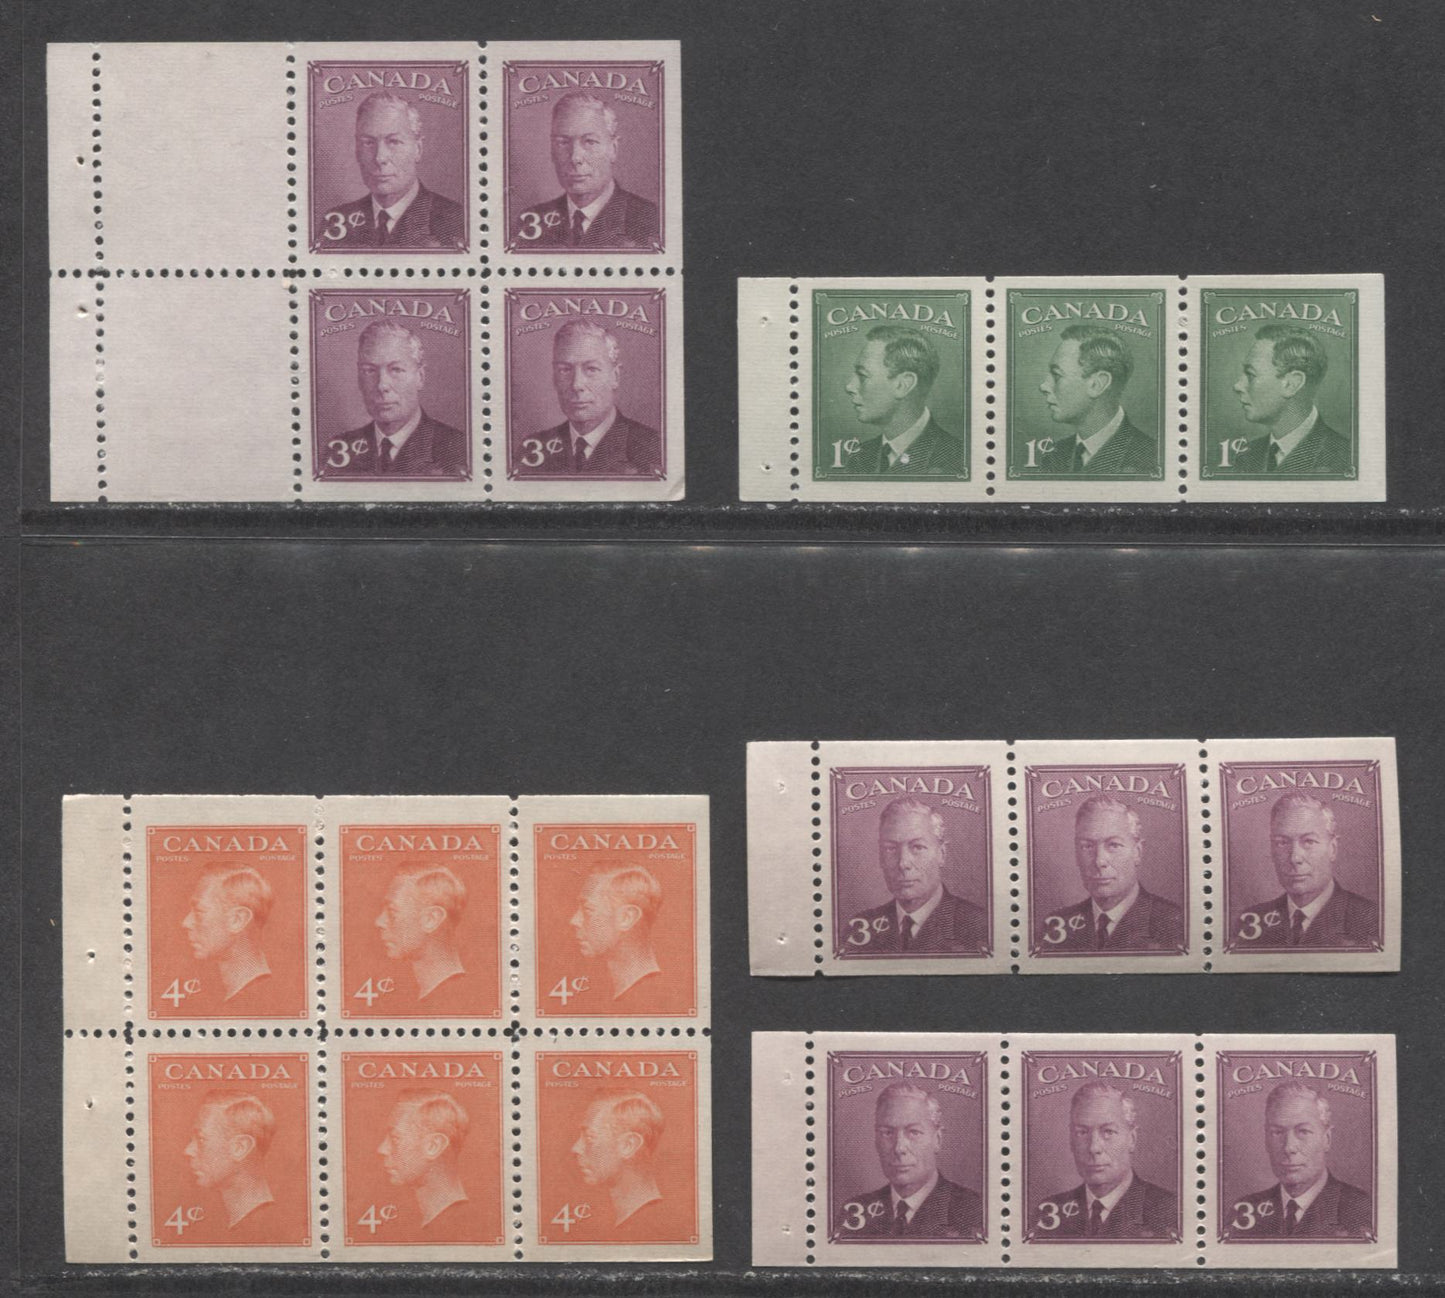 Lot 387 Canada #286a, b, 284a, 306b 1c/4c Green/Orange Vermillion King George VI, 1949-1951 Postes Postage & New Colors Issues, 5 VFNH Booklet Panes Of 3, 4 & 6 Includes 2 Shades Of 286a